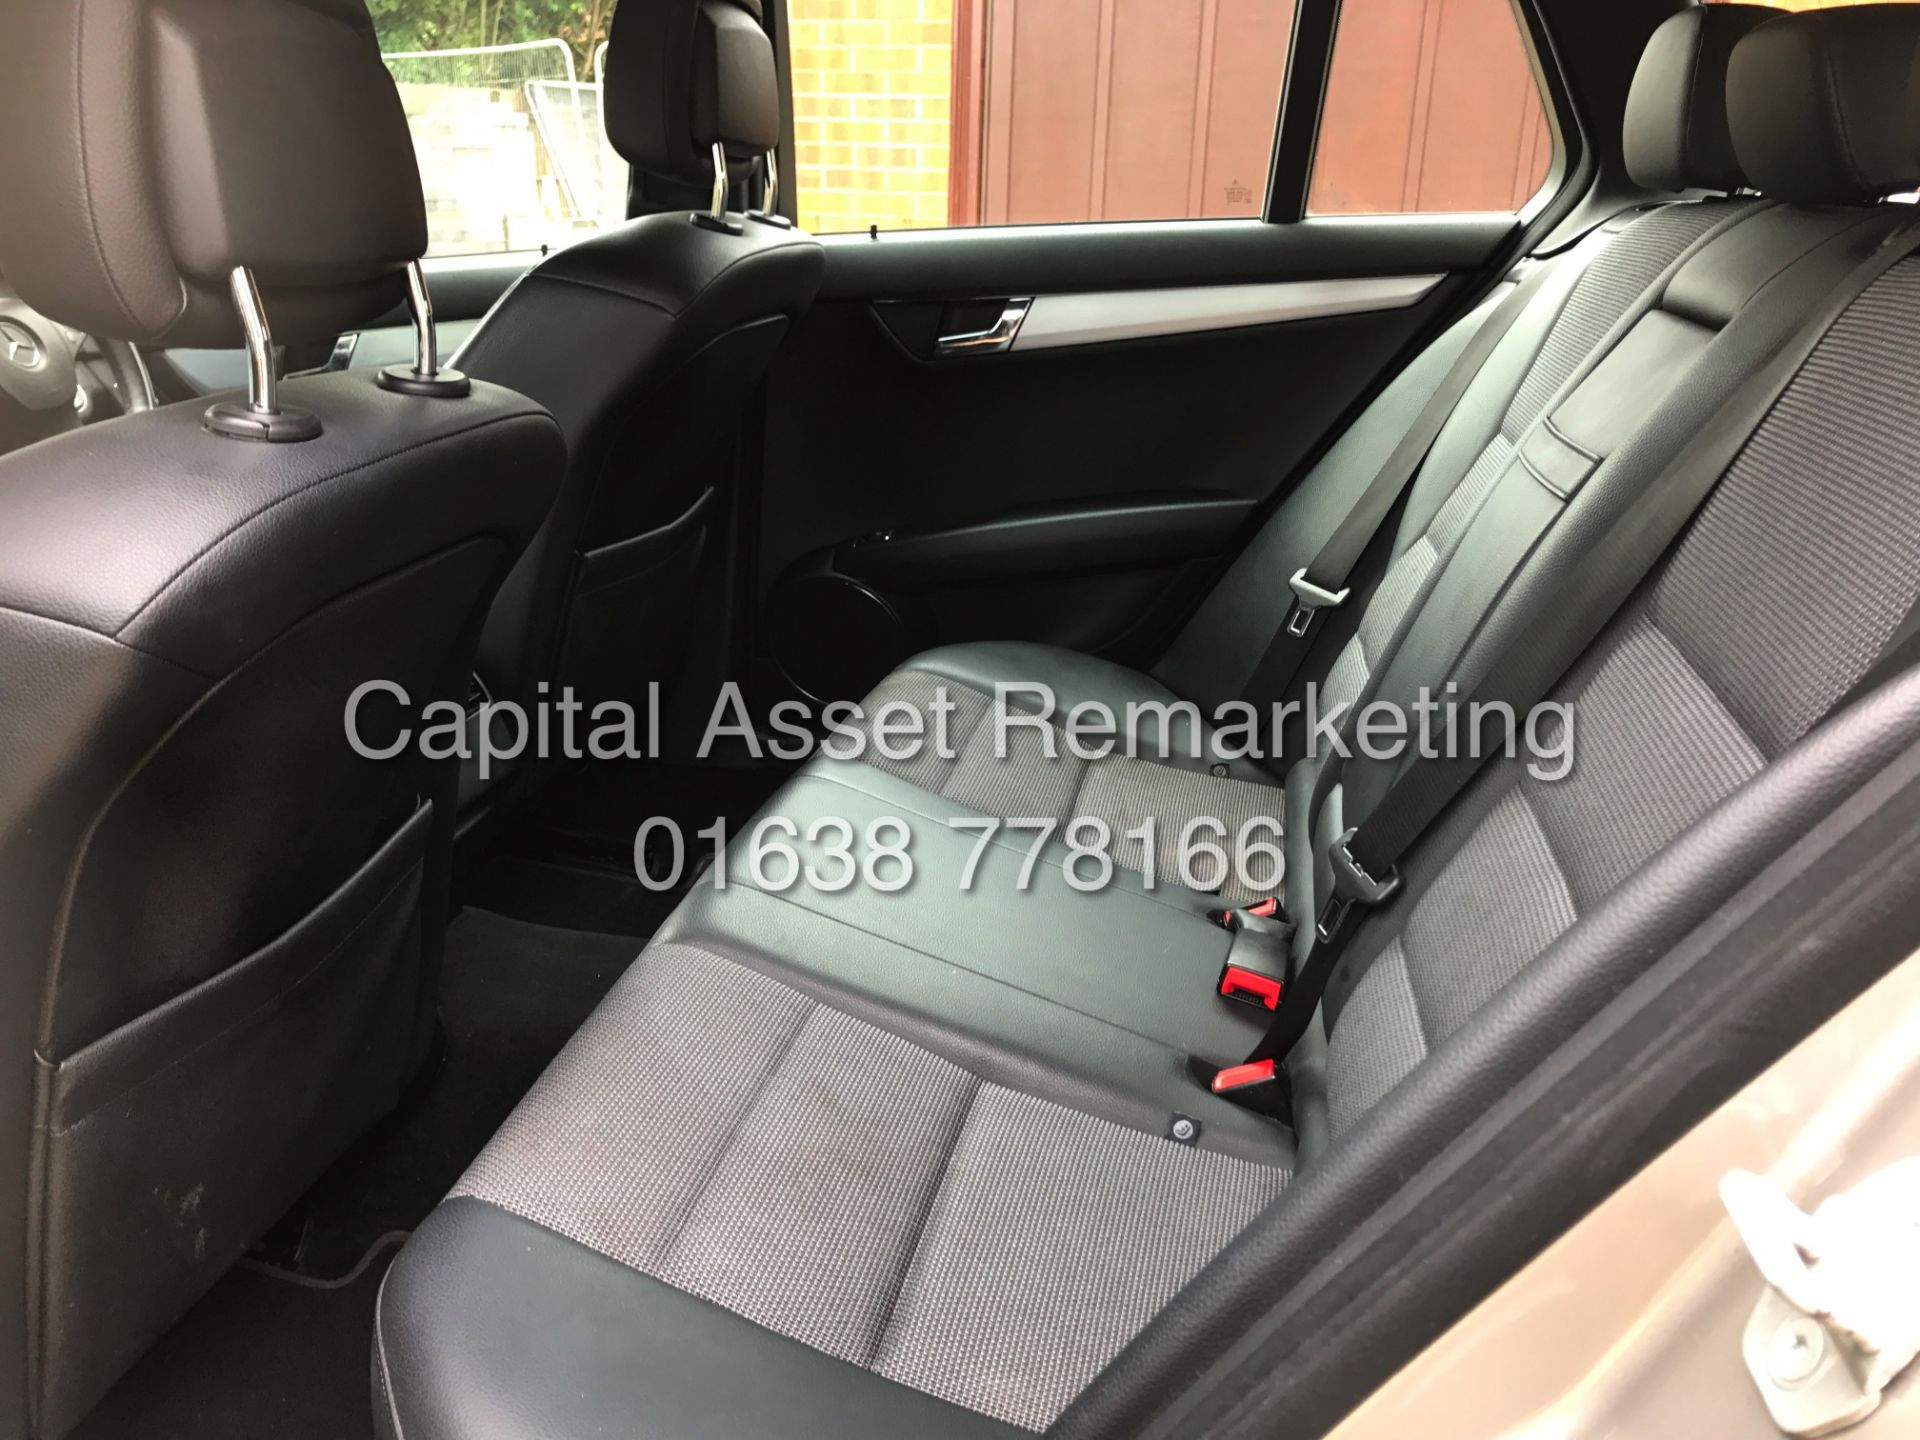 MERCEDES C220CDI "AMG SPORT" ESTATE - CLIMATE - AIR CON - LEATHER - TOP SPEC - Image 18 of 20